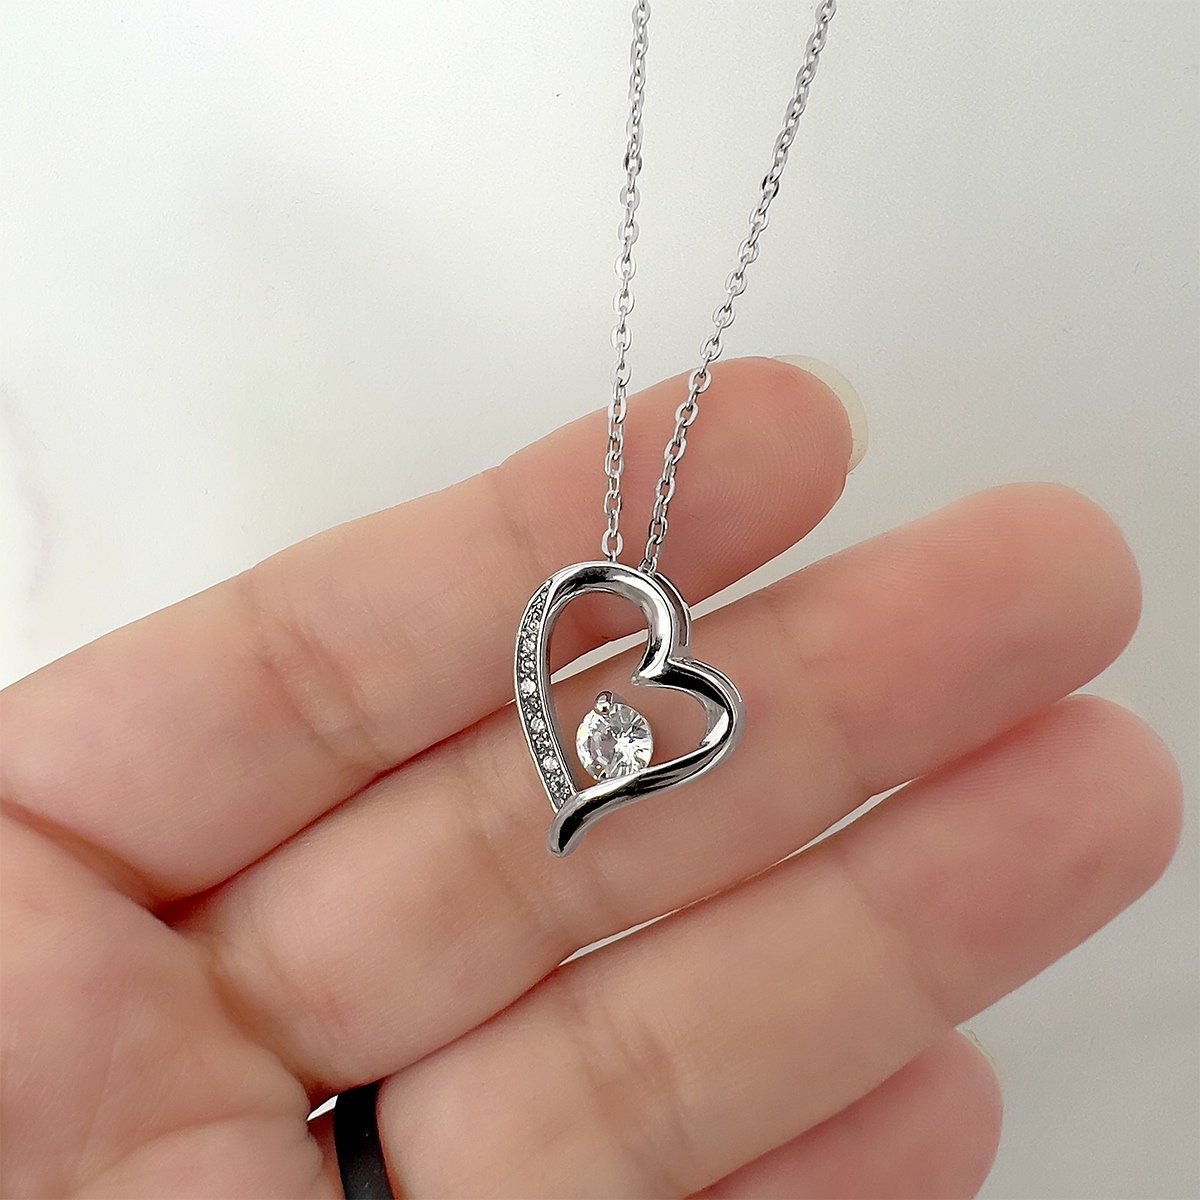 To My Gorgeous Wife, When I Say "I Love You More" - Silver Heart Necklace Gift Set